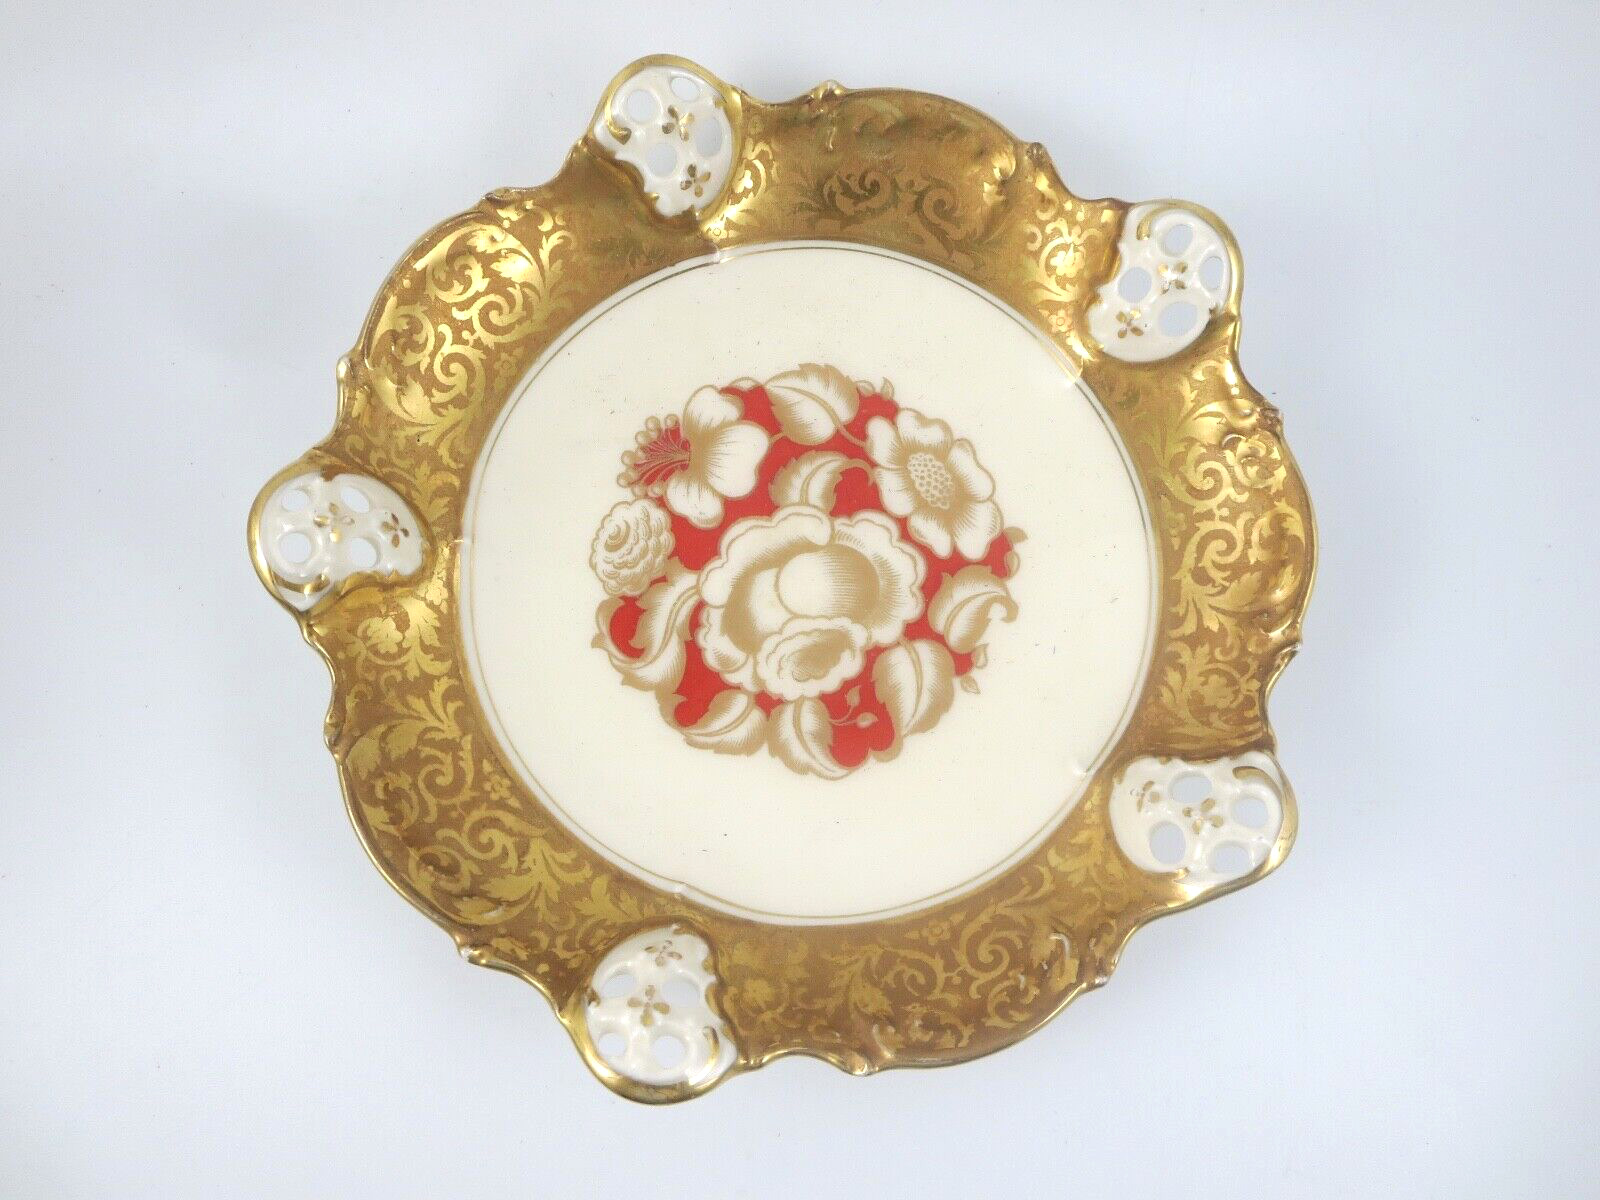 ROSENTHAL 1884 KRONACH-GERMANY MOLIERE ROSEMARIE GOLD RED PORCELAIN PLATE BOWL